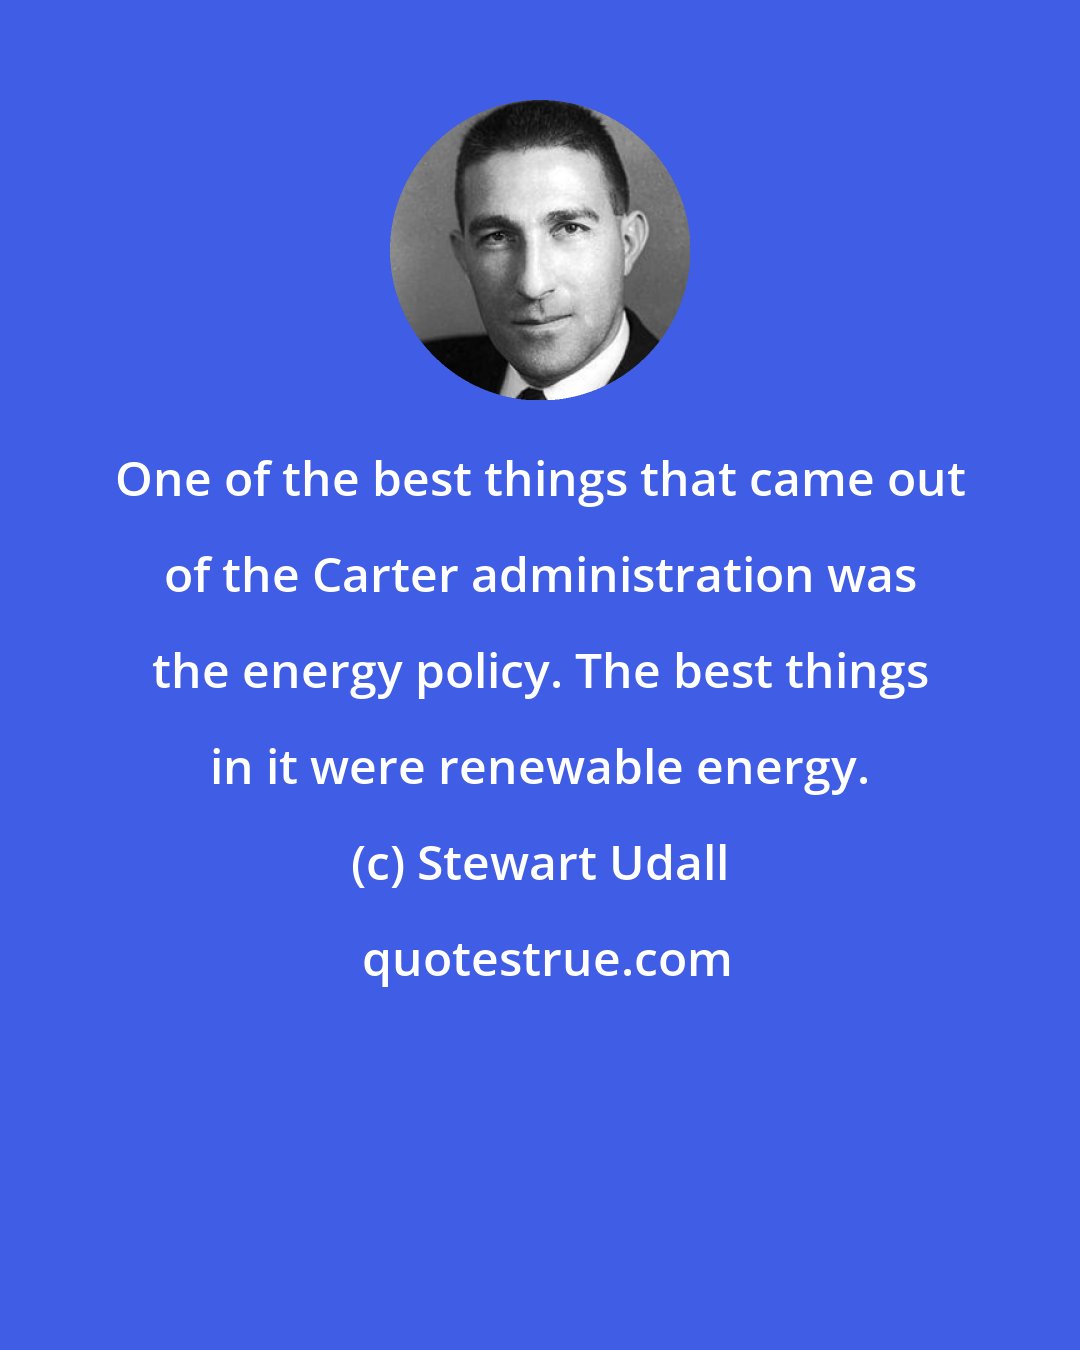 Stewart Udall: One of the best things that came out of the Carter administration was the energy policy. The best things in it were renewable energy.